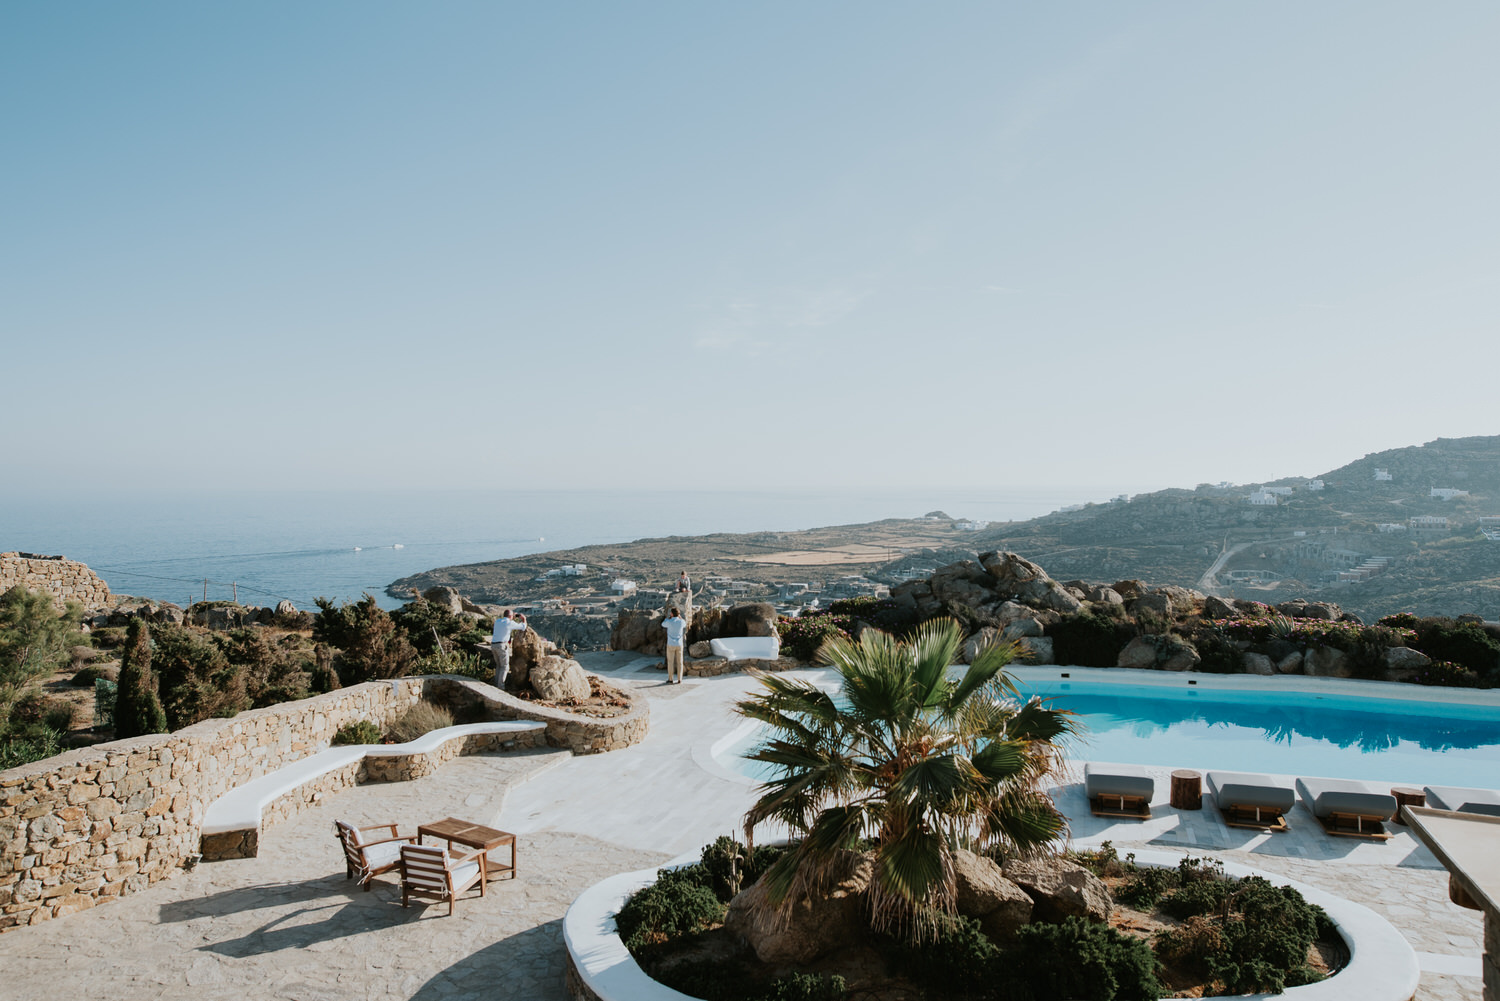 Mykonos wedding photographer: panoramic photo of the pool and a palm tree on reception terrace with sea in the background.